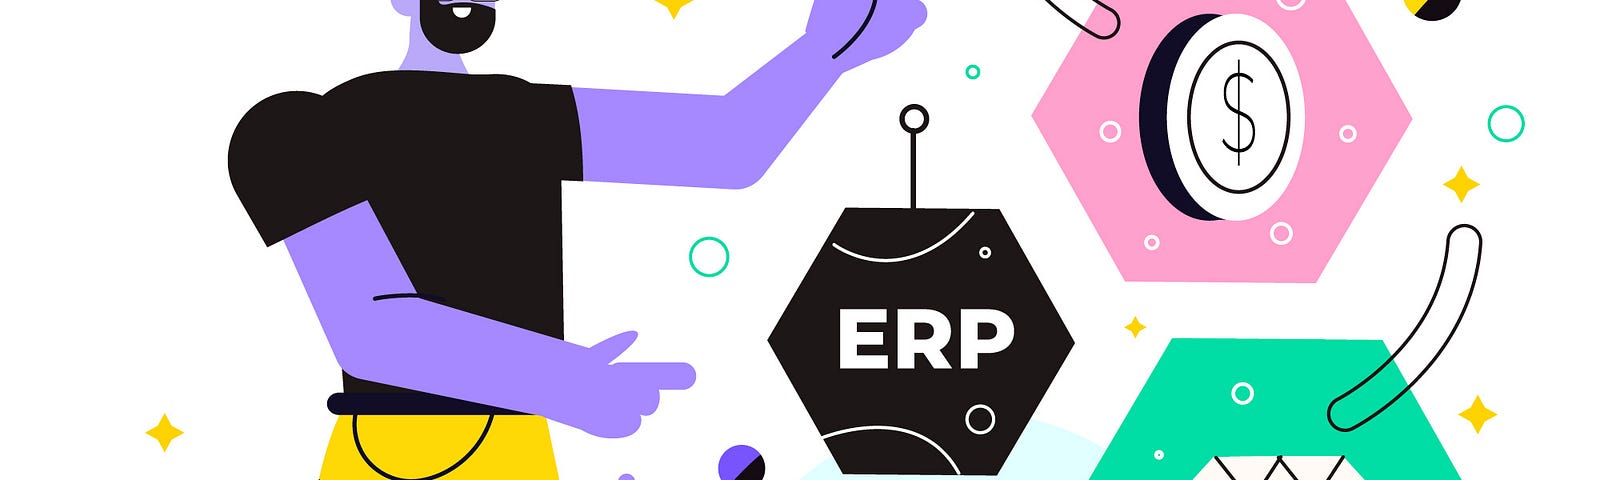 Company employee, ERP vendor employee, or company executive demonstrates the three different types of an ERP system.